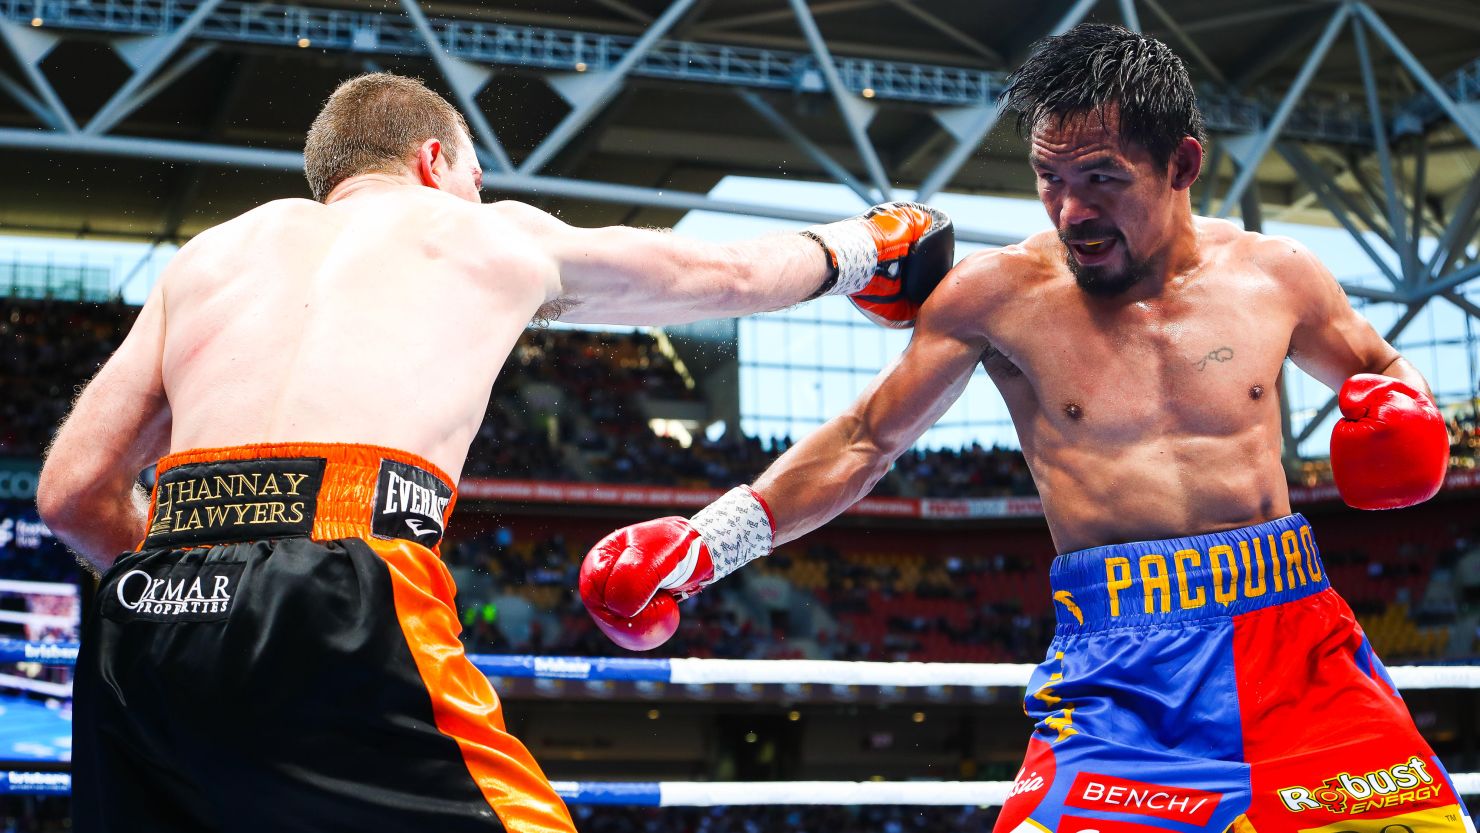 Australian boxer Jeff Horn takes on Manny Pacquiao at Suncorp Stadium in Brisbane on July 1, 2017.